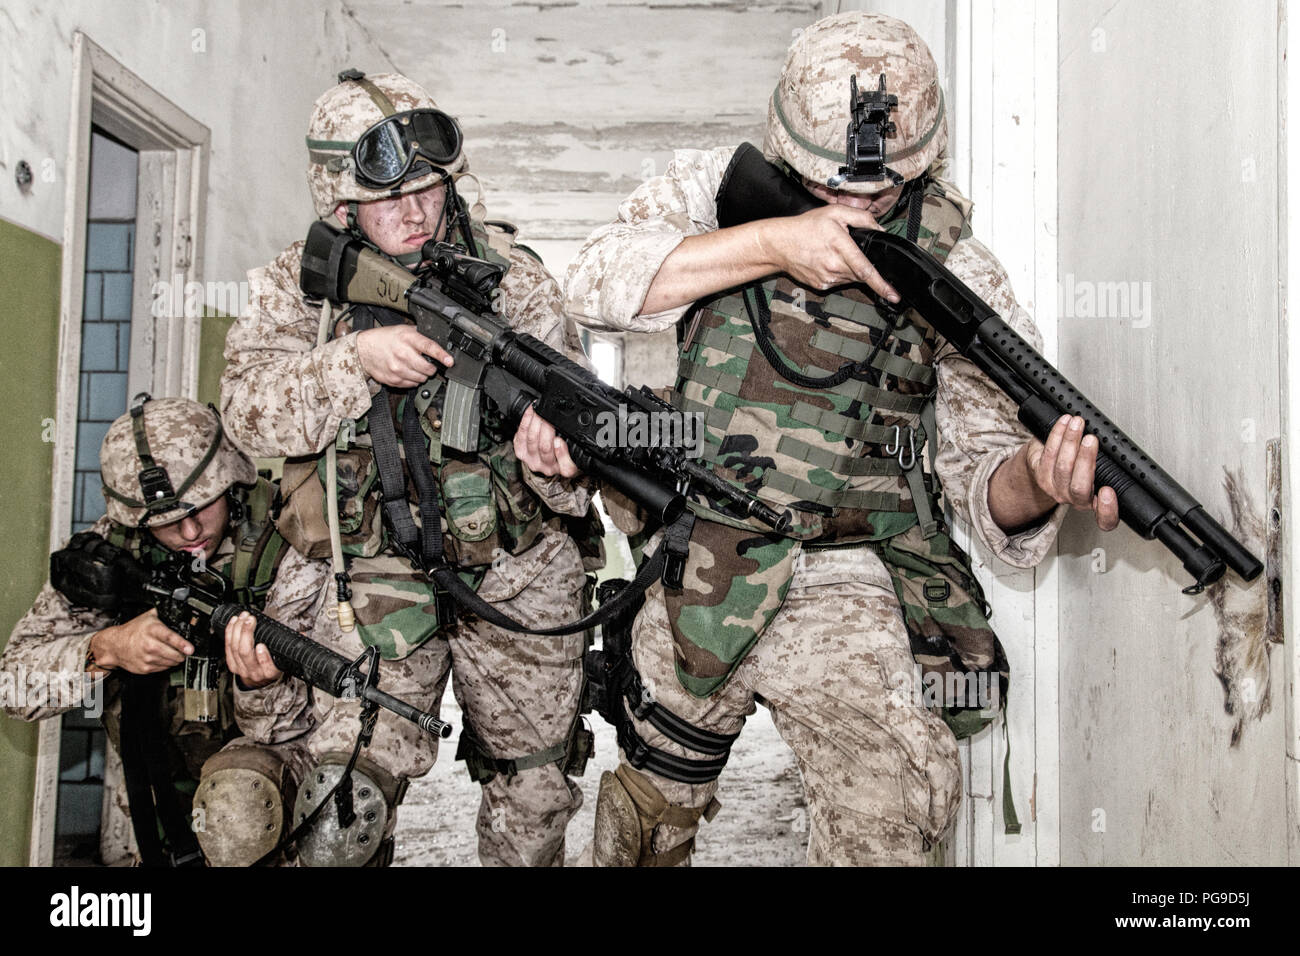 Marines clearing rooms with fight in city quarter Stock Photo